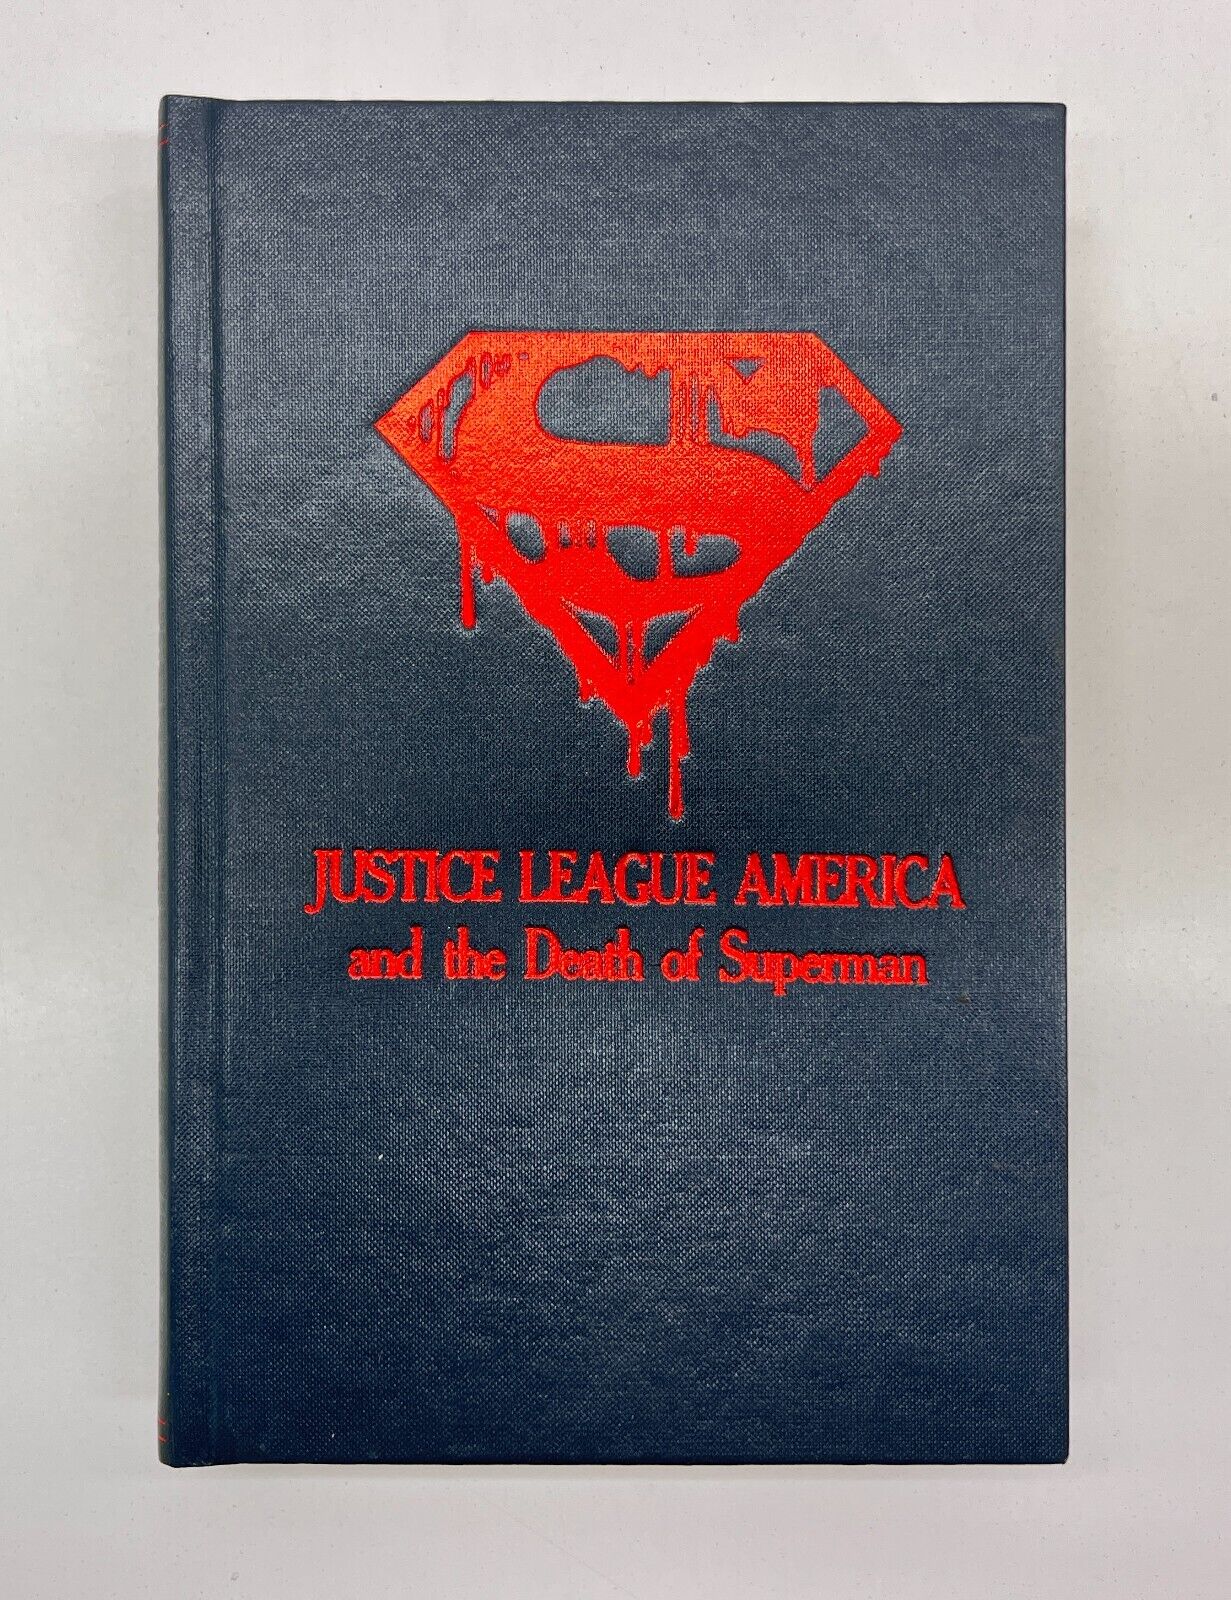 Justice League America and the Death of Superman Hard Cover book pre-Owner #88A